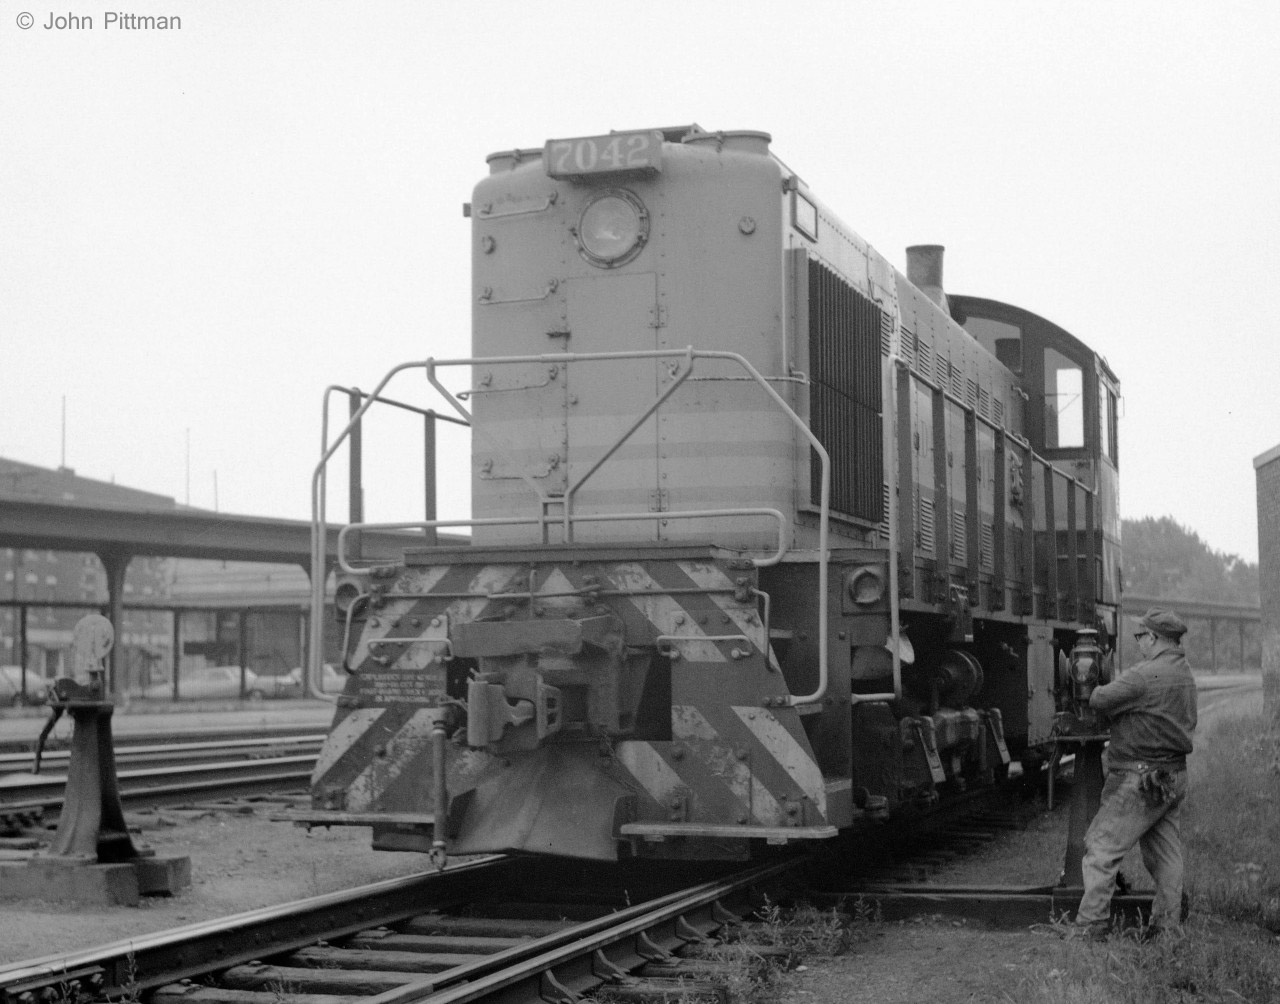 ALCO S-2 switcher CP 7042, is en route between its parking track beside the roundhouse, and a flat switching job in Trois-Rivieres yard, where it was regularly assigned. My source indicates it was built by ALCO Schenectady in 1946, so it was then about 24 years old.
I don't ever recall multiple switchers working together at T-R in 1970-71.  The absence of MU socket and related brake hoses in this S-2 picture is one very good reason ! 

I was the only visible railfan around T-R station and yard for the two years we lived there. The local railroaders may have been puzzled by my activities, but were quite tolerant. I didn't push my luck too far, I guess.